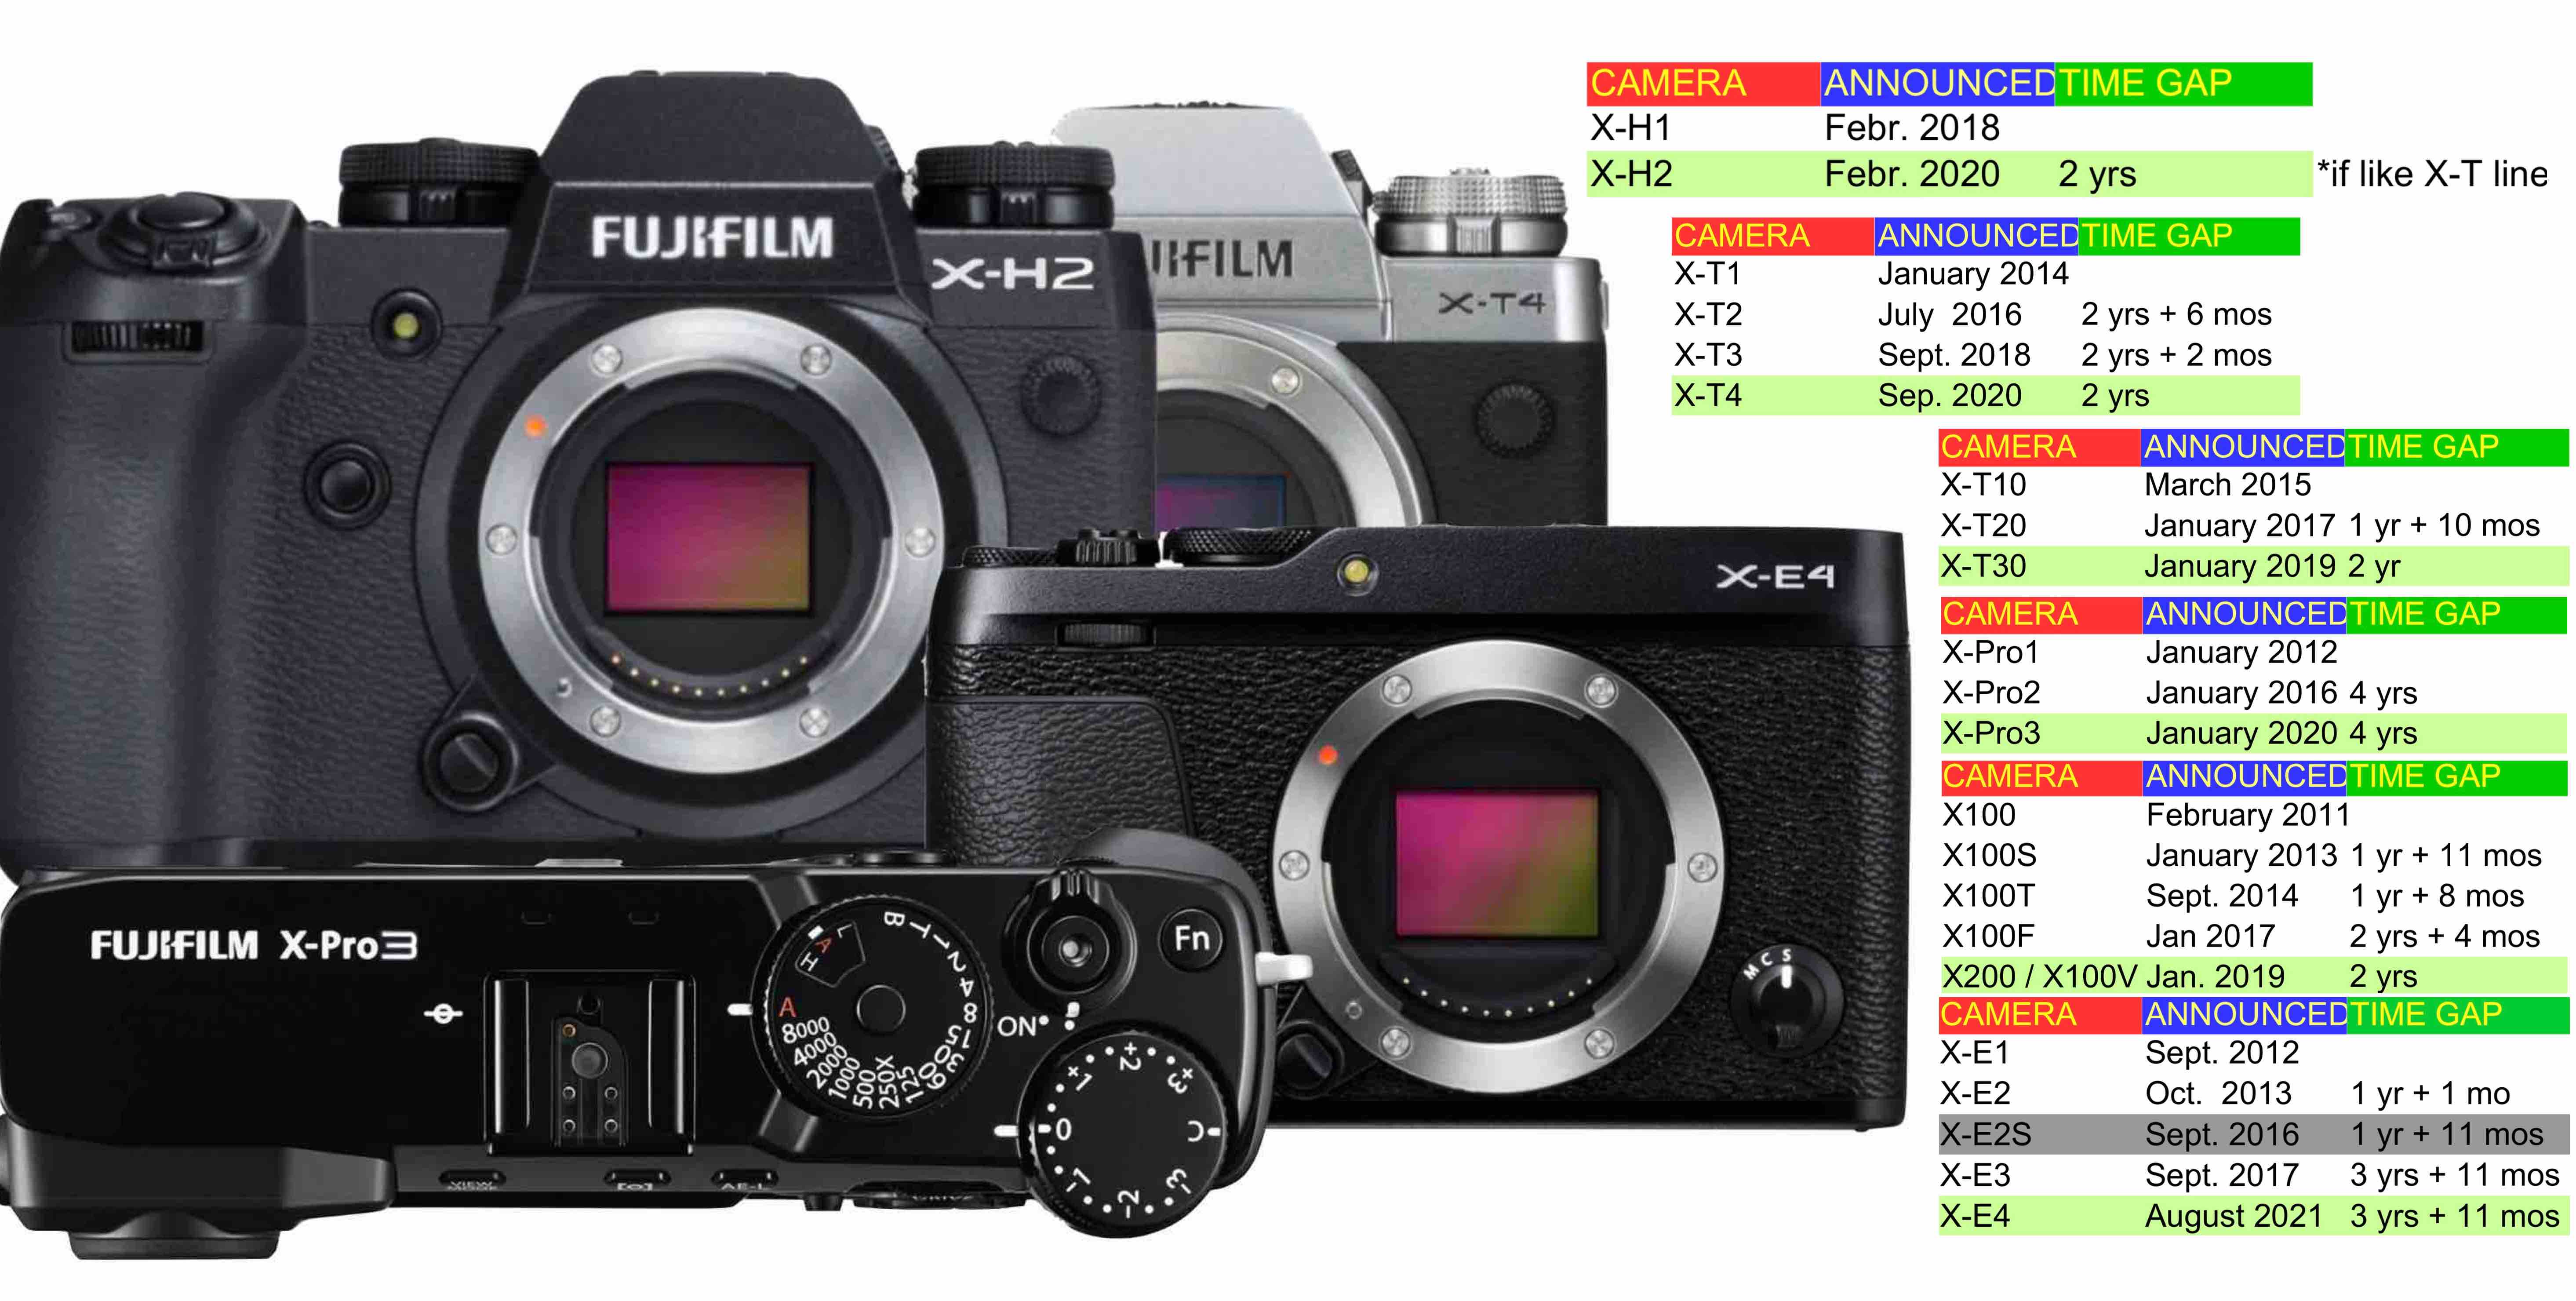 traagheid Coördineren Geboorte geven Fujifilm X Camera Replacement Timeline from 2011 to 2018 and What This  Could Mean for X-H2, X-T4, X-T30, X-Pro3, X-E4, X200 - Fuji Rumors